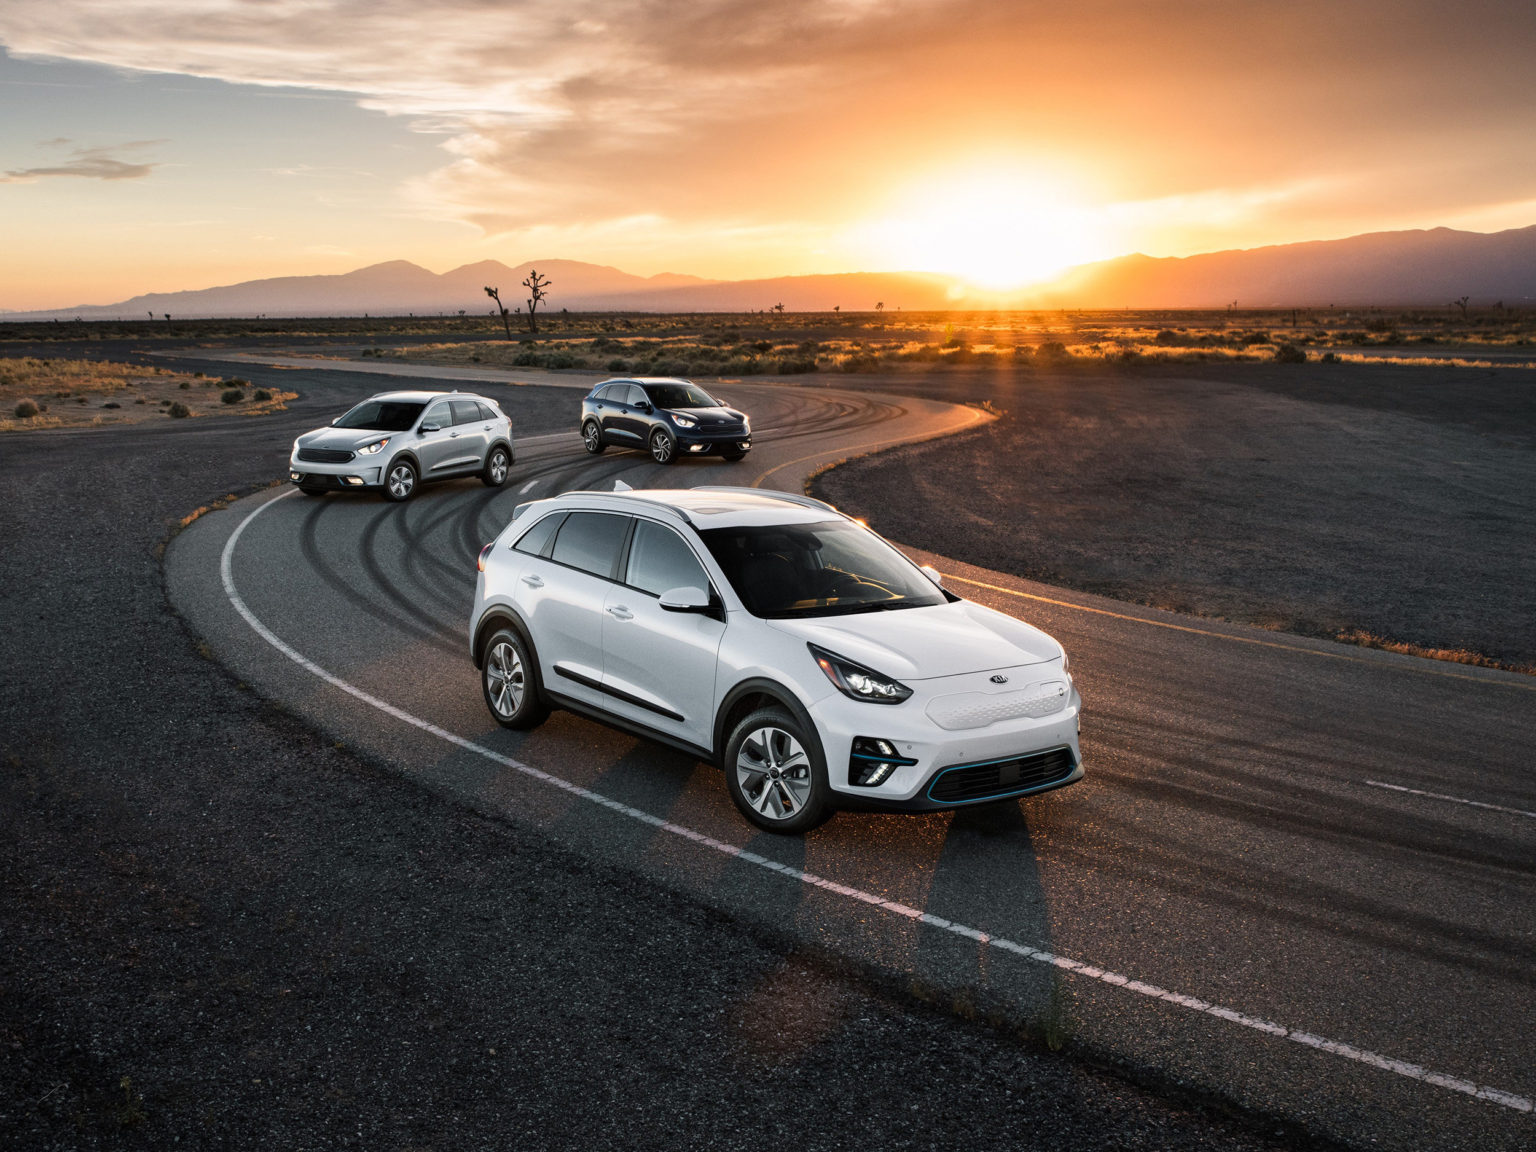 Hyundai, Kia, Tesla, and Honda make the list for the best plug-in electric vehicles.